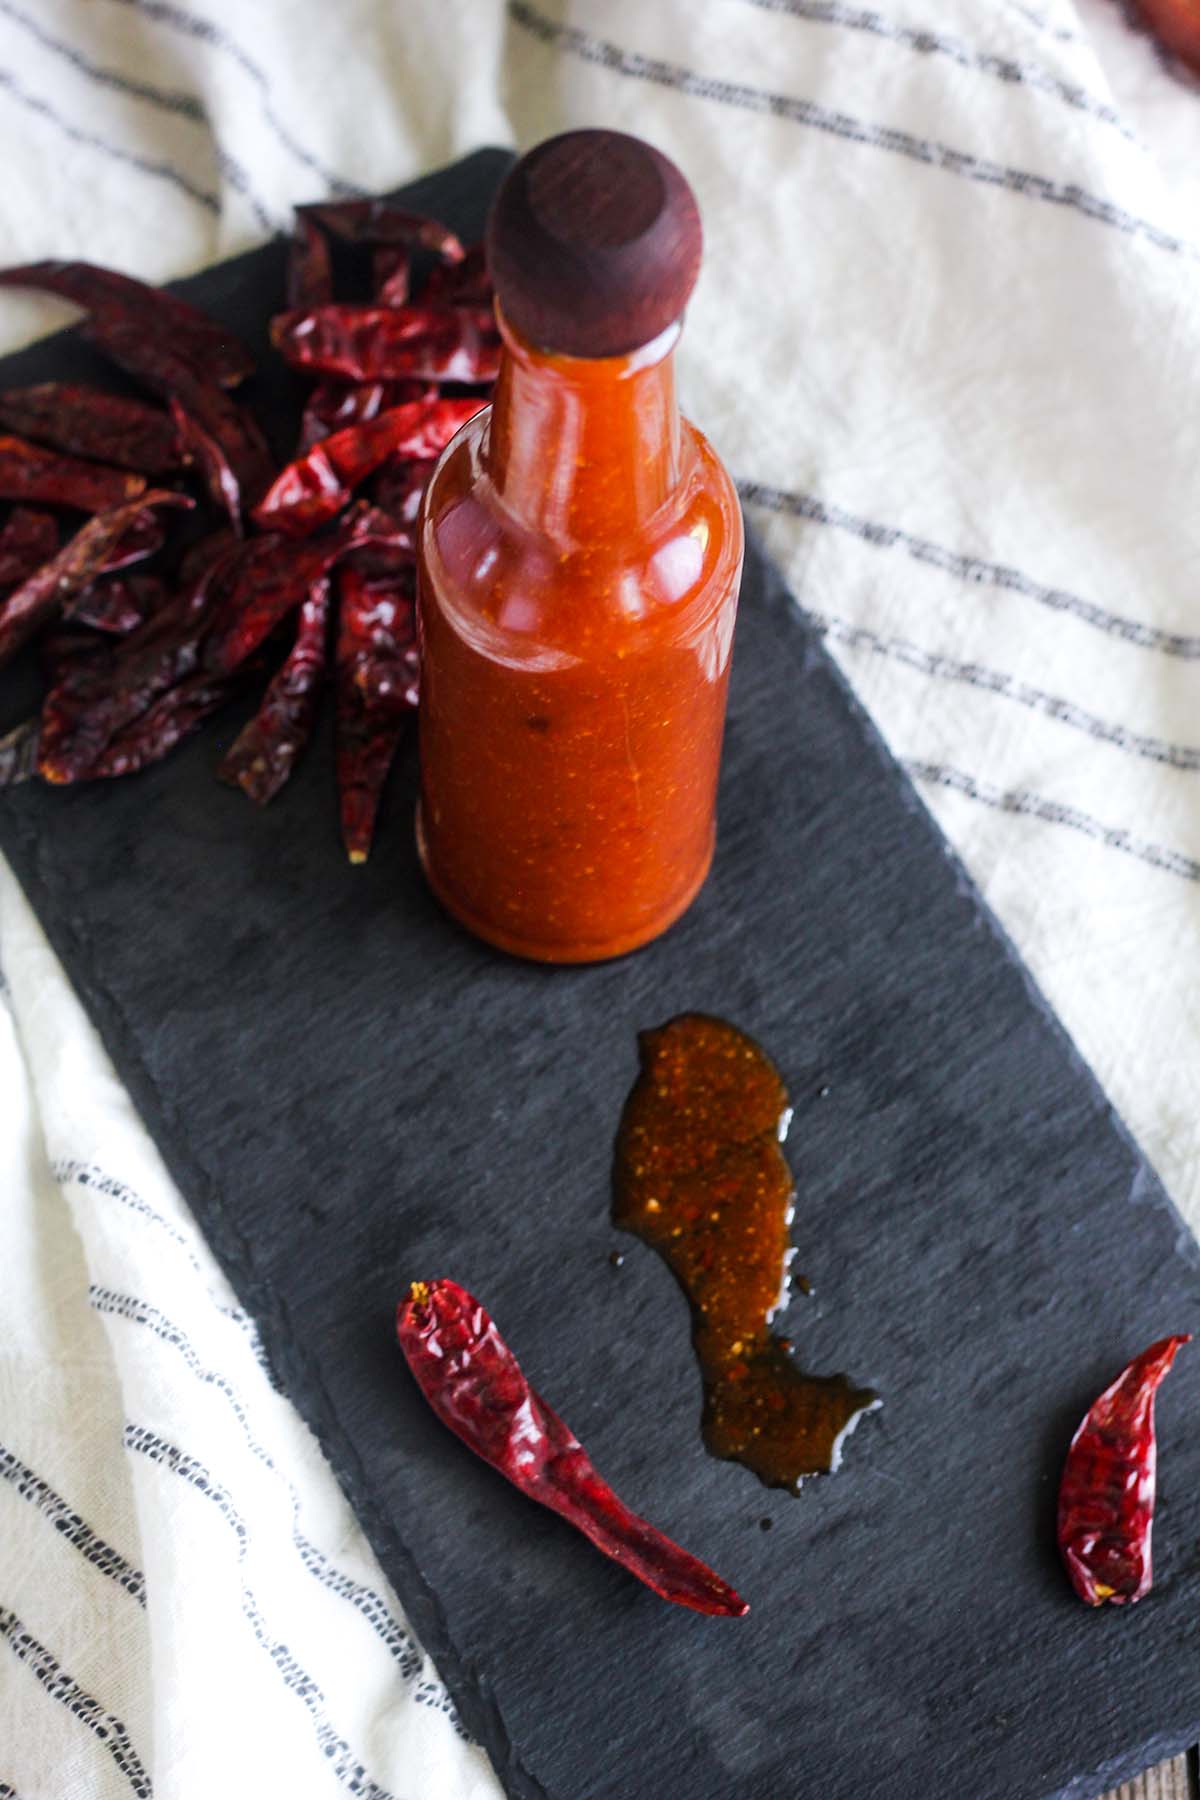 Bottle of hot sauce on a tray with scattered chiles.